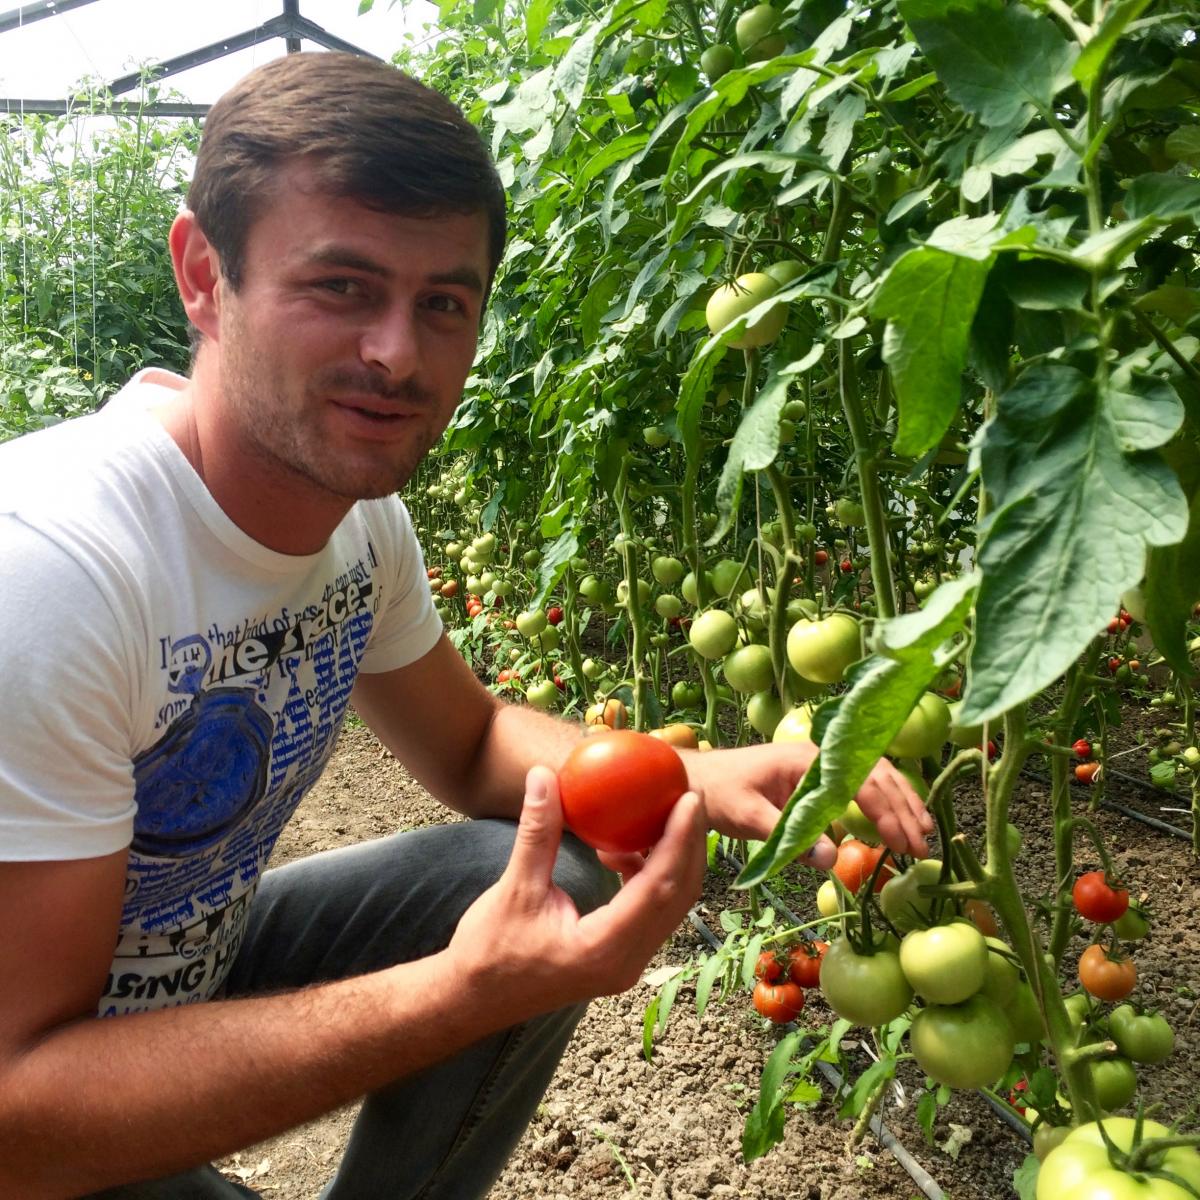 Giorgi Shavadze set up his first greenhouse in 2015 with USAID assistance.